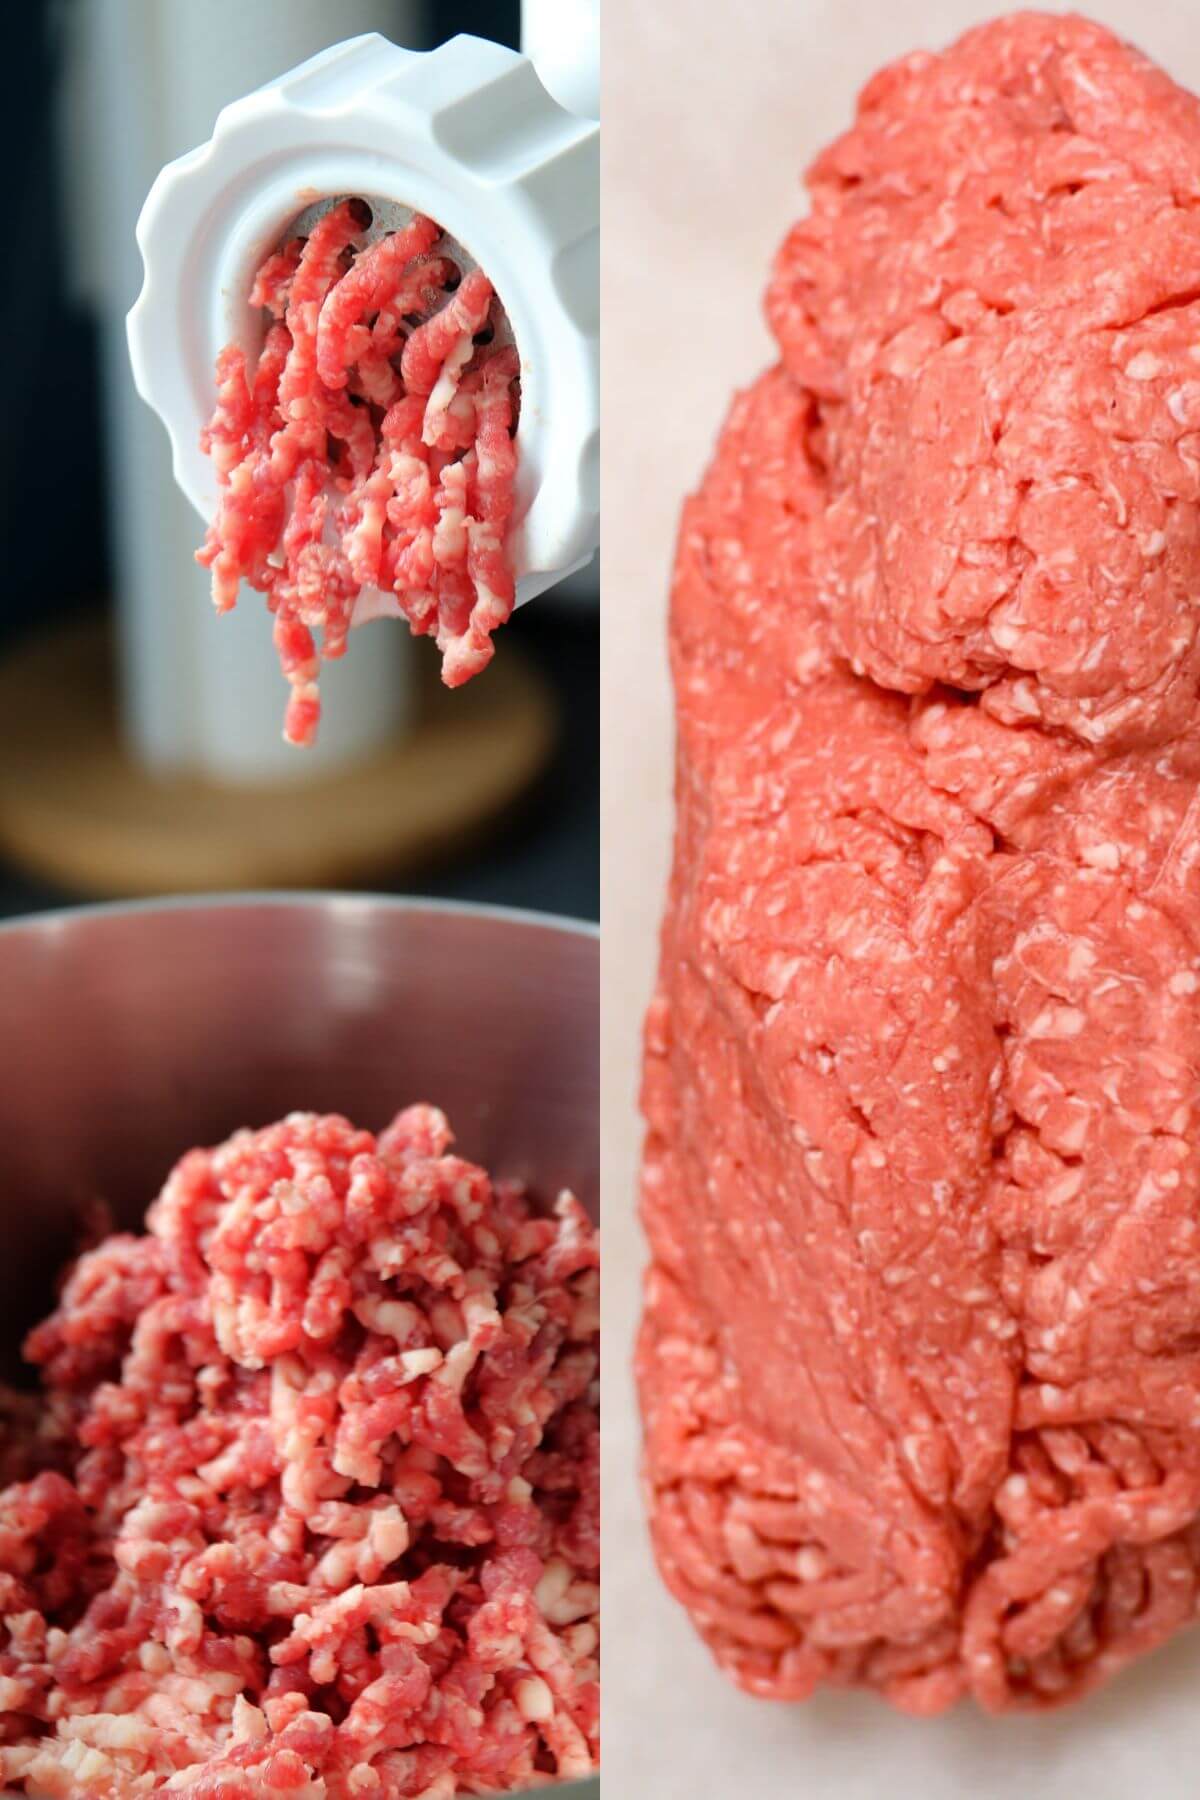 Two images of raw beef coming out of the mincer and a lump of ground beef.